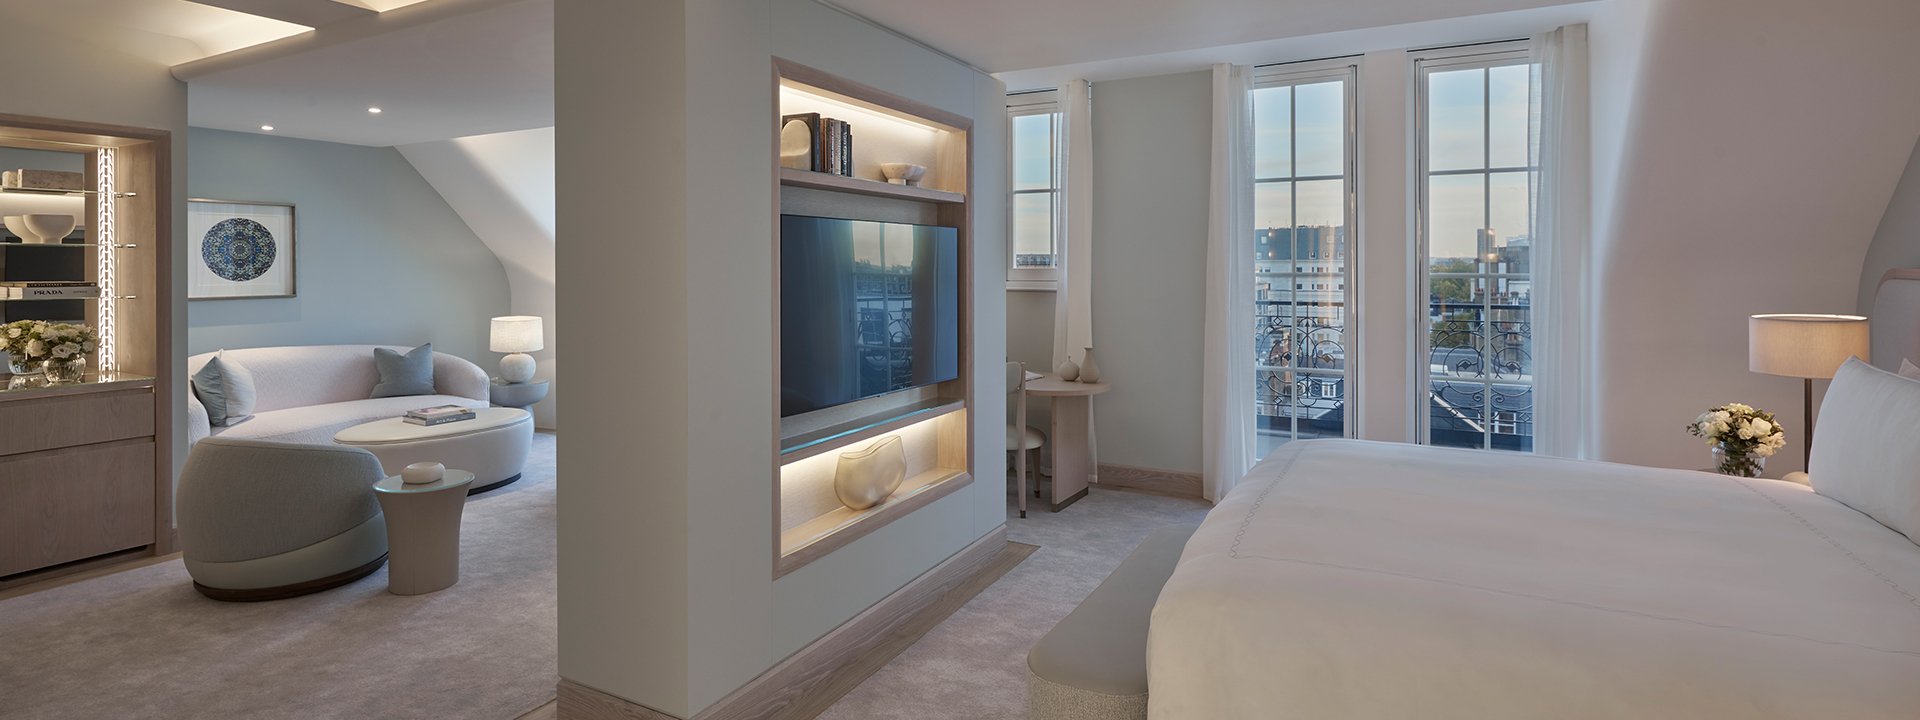 The transition between the bedroom and sitting areas, in shades of grey and beige in the Terrace Junior Suite.